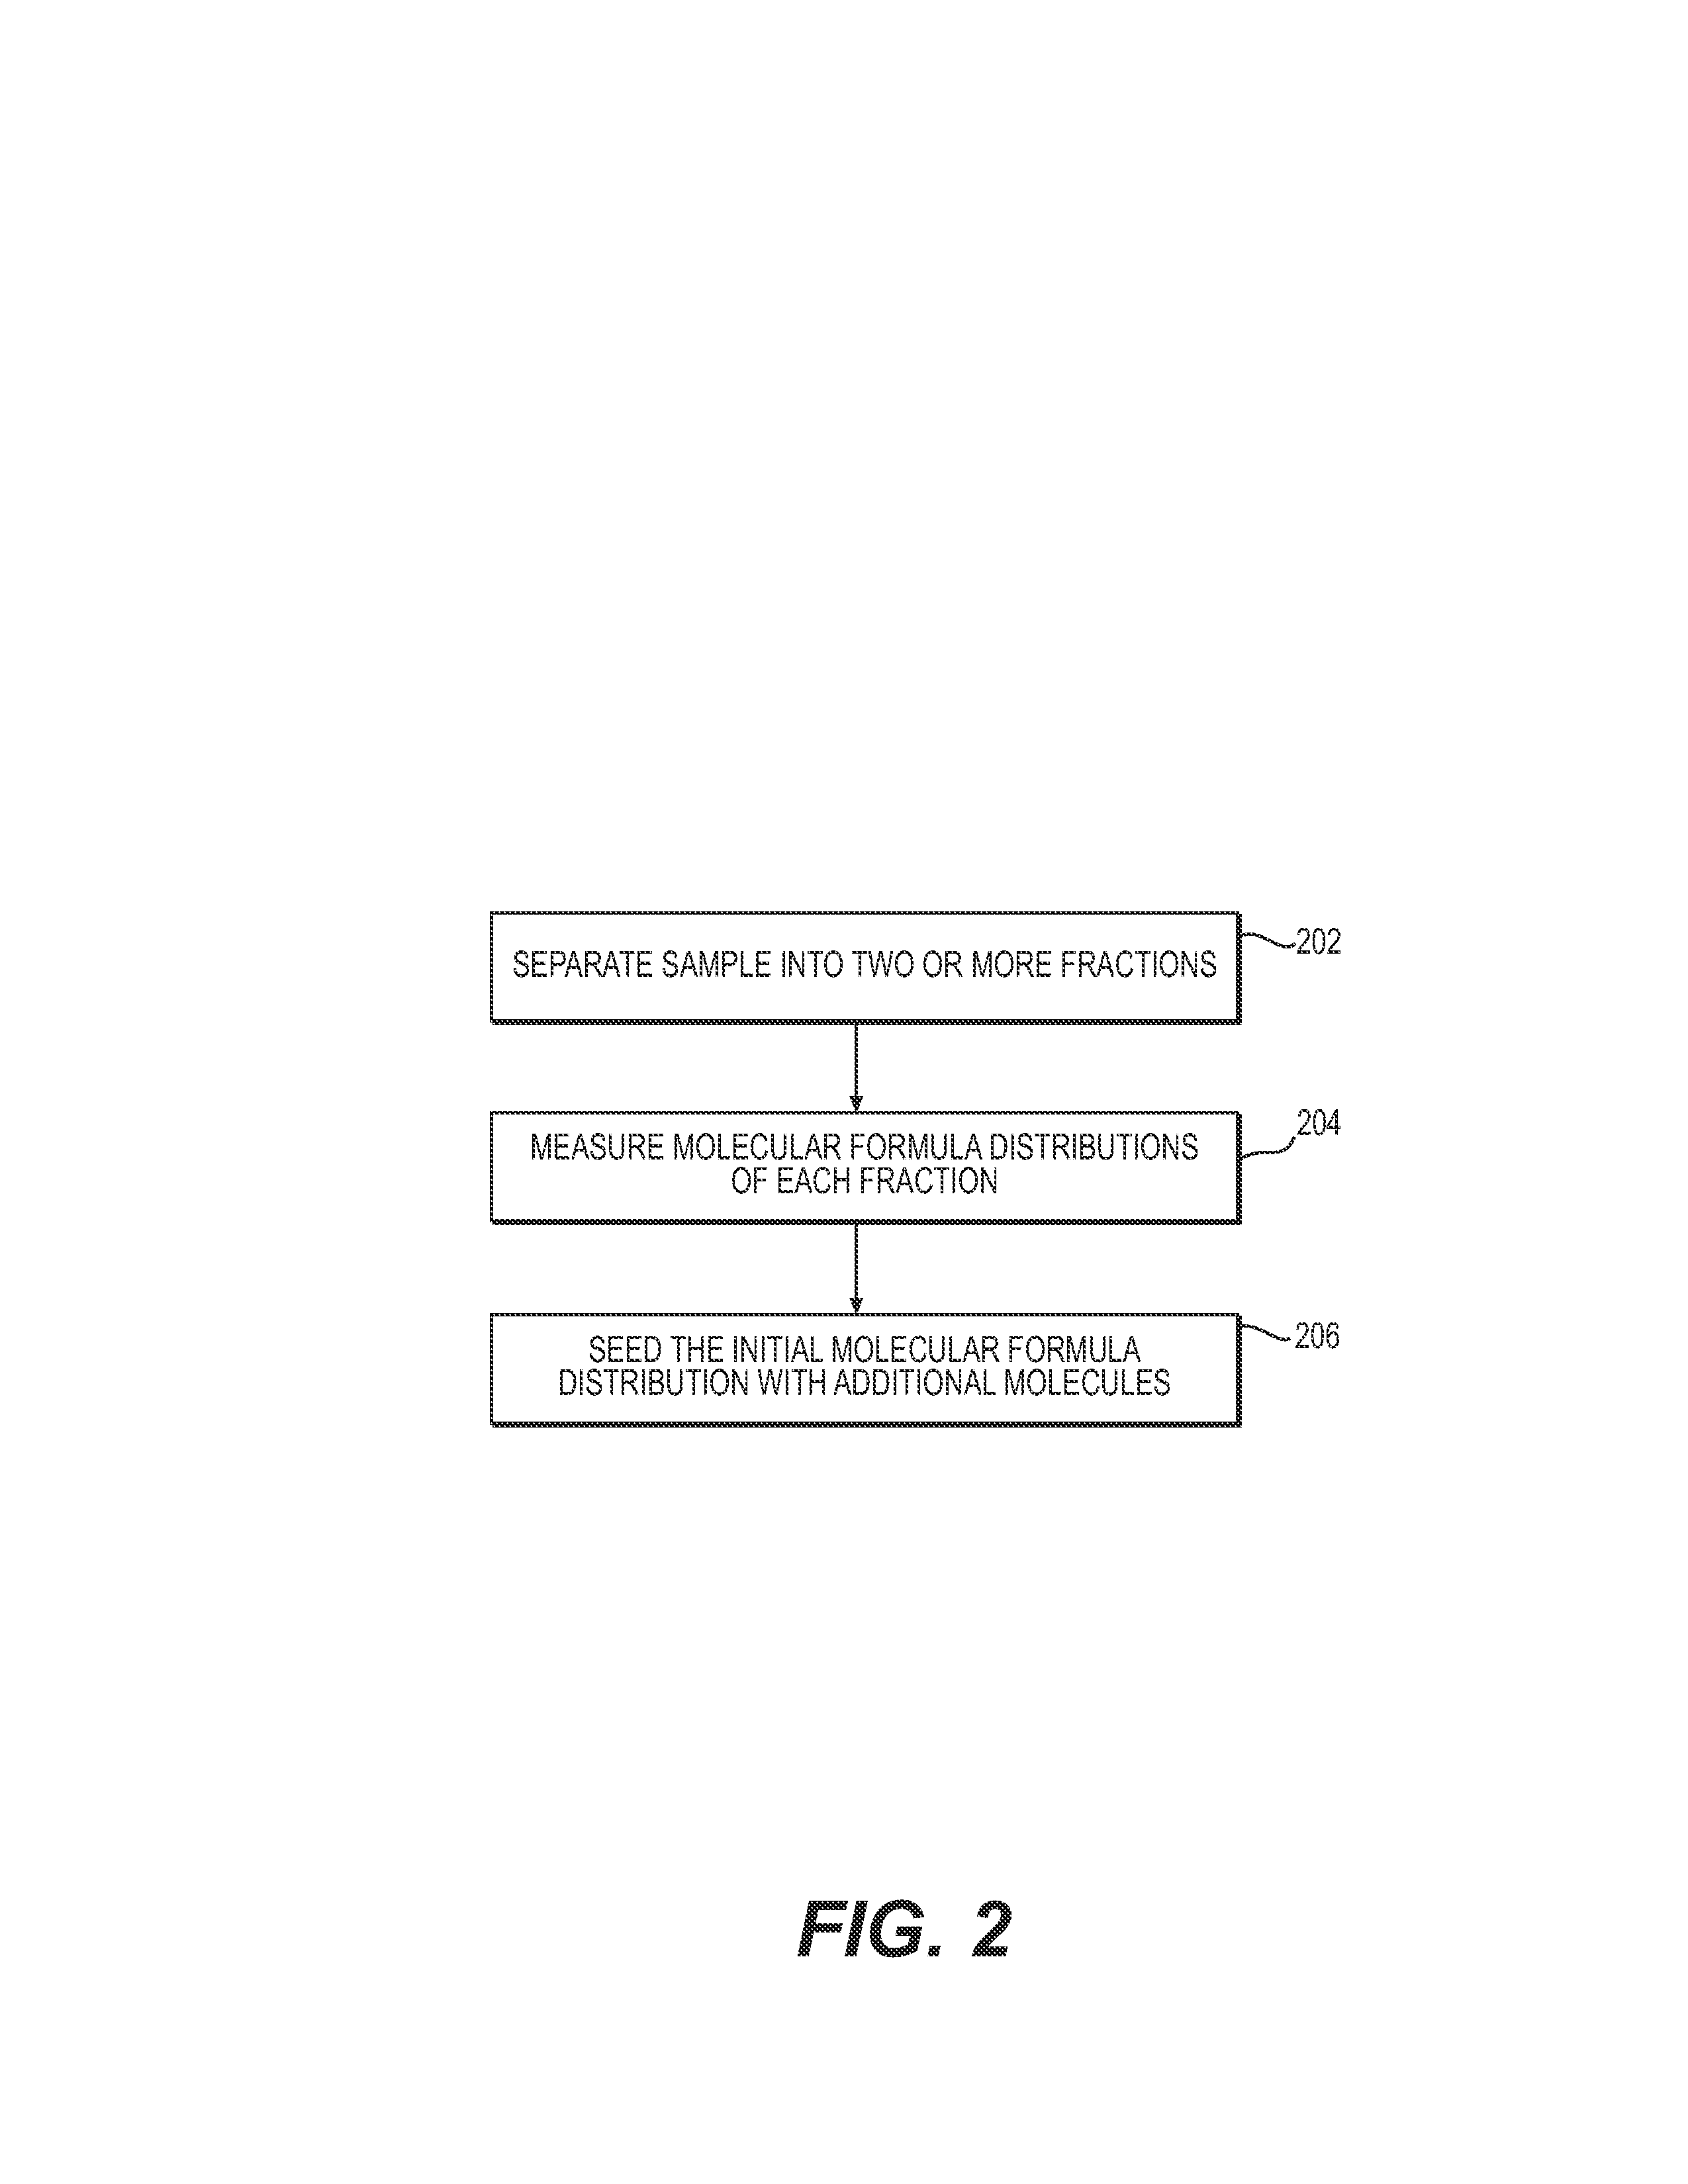 System and method to generate moledular formula distributions beyond a predetermined threshold for a petroleum stream